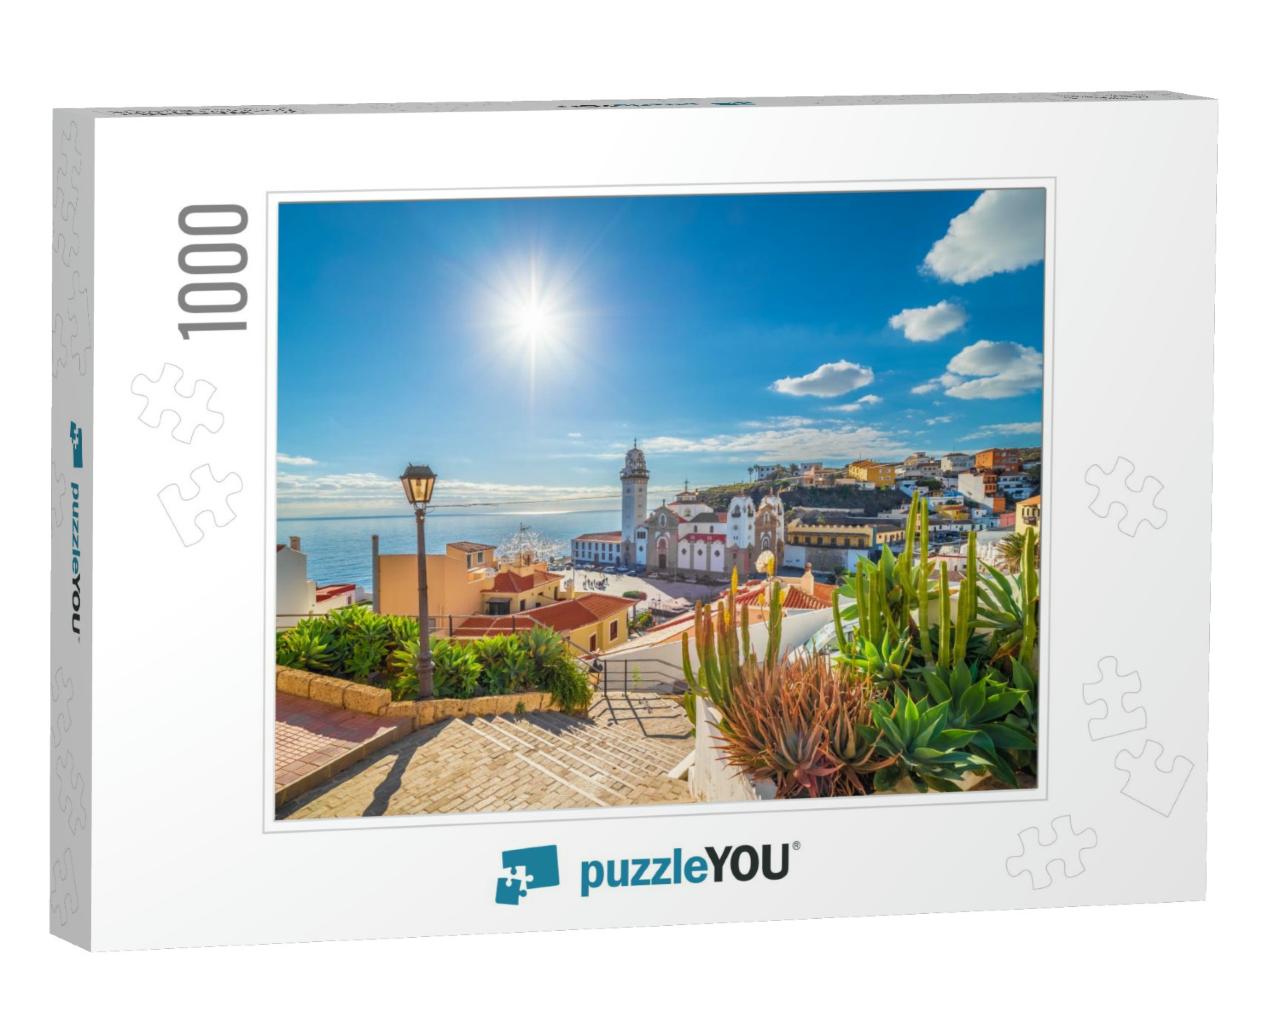 Landscape with Candelaria Town on Tenerife, Canary Island... Jigsaw Puzzle with 1000 pieces